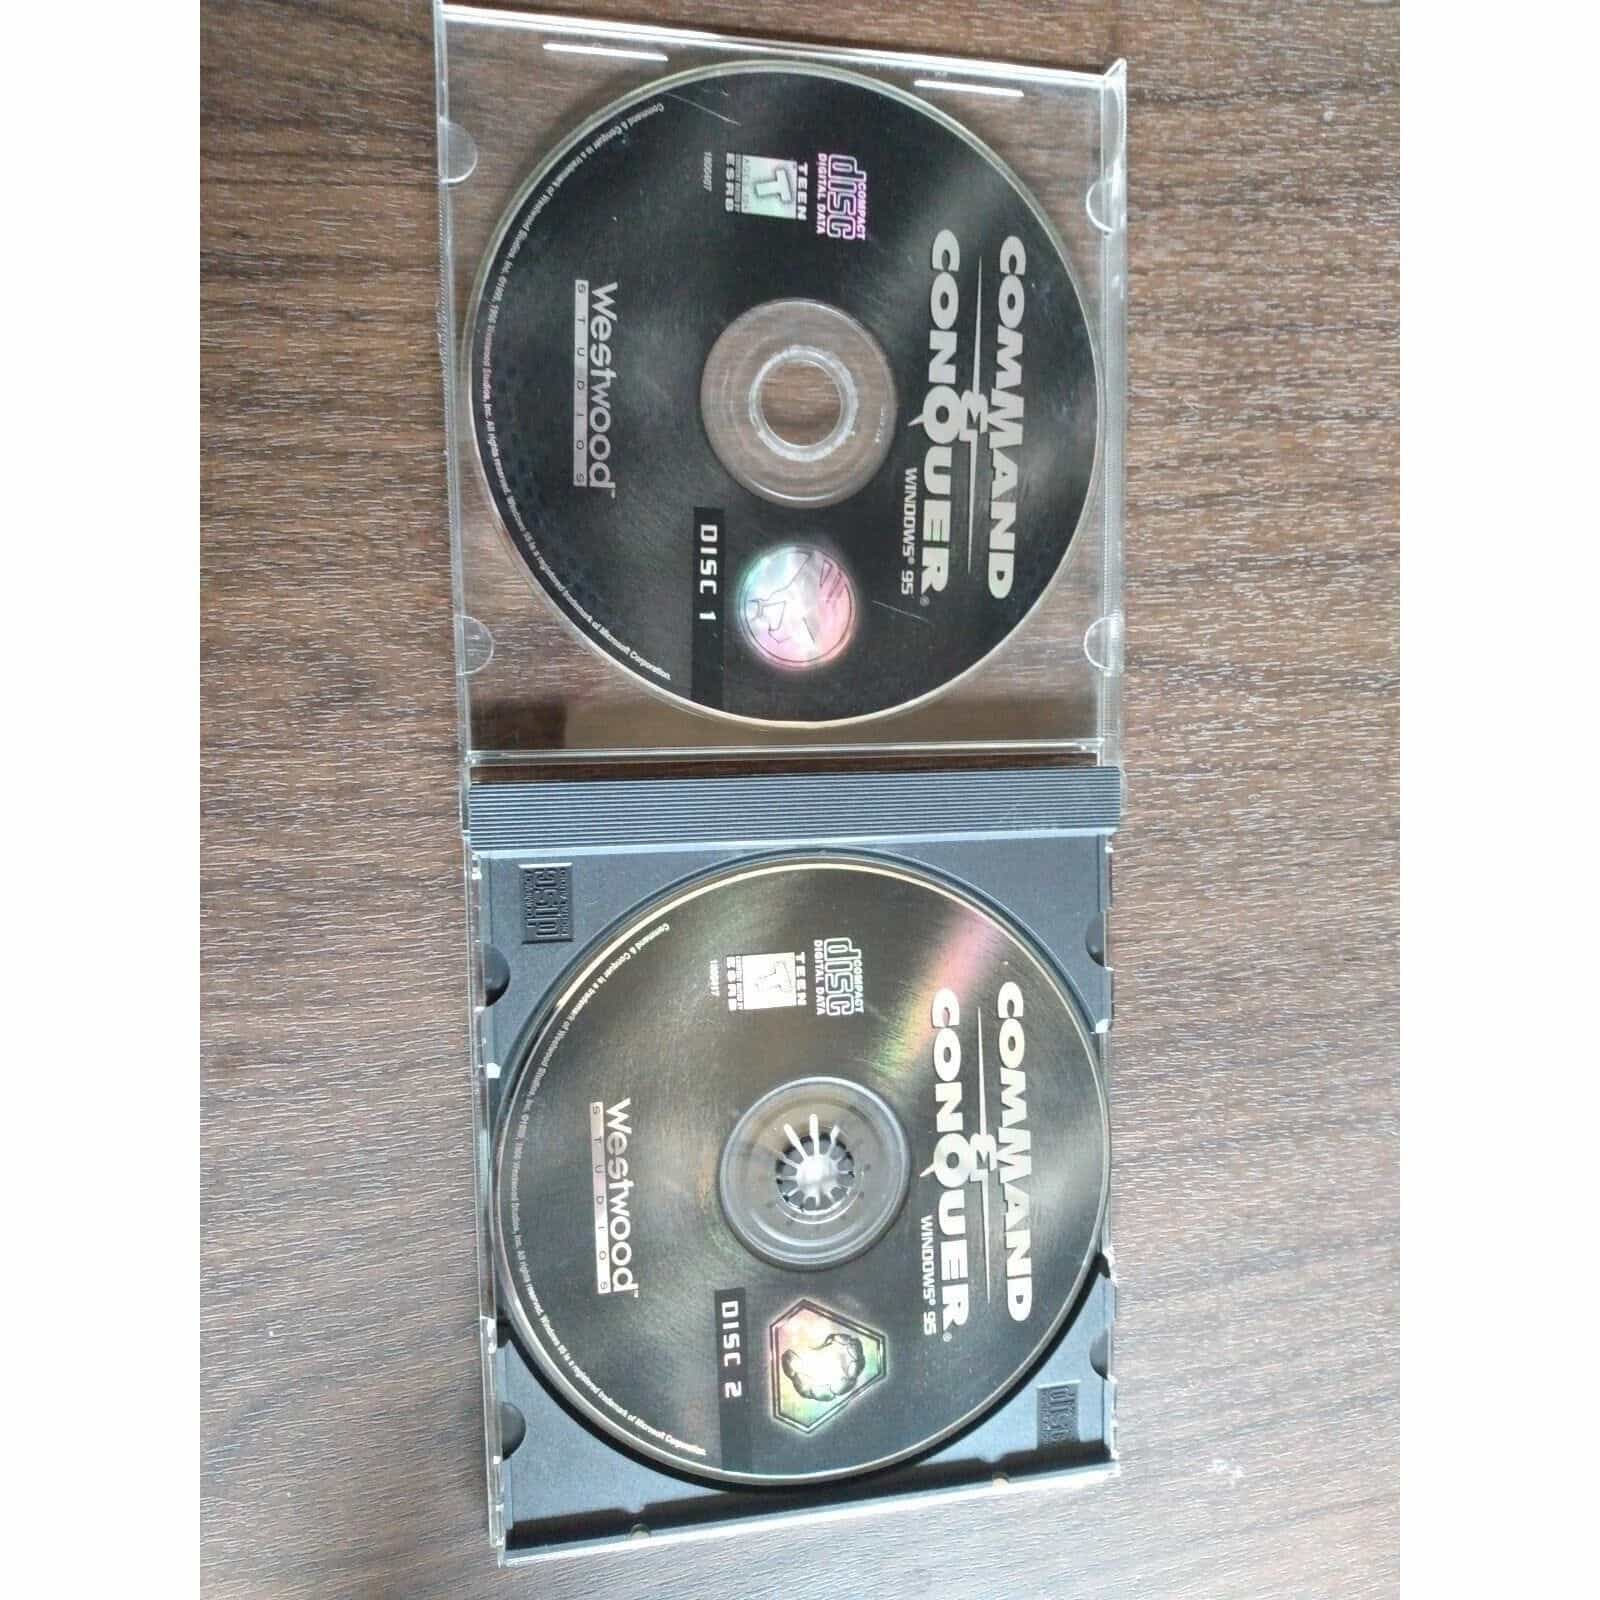 Command & Conquer (2 disc set) – Discs only